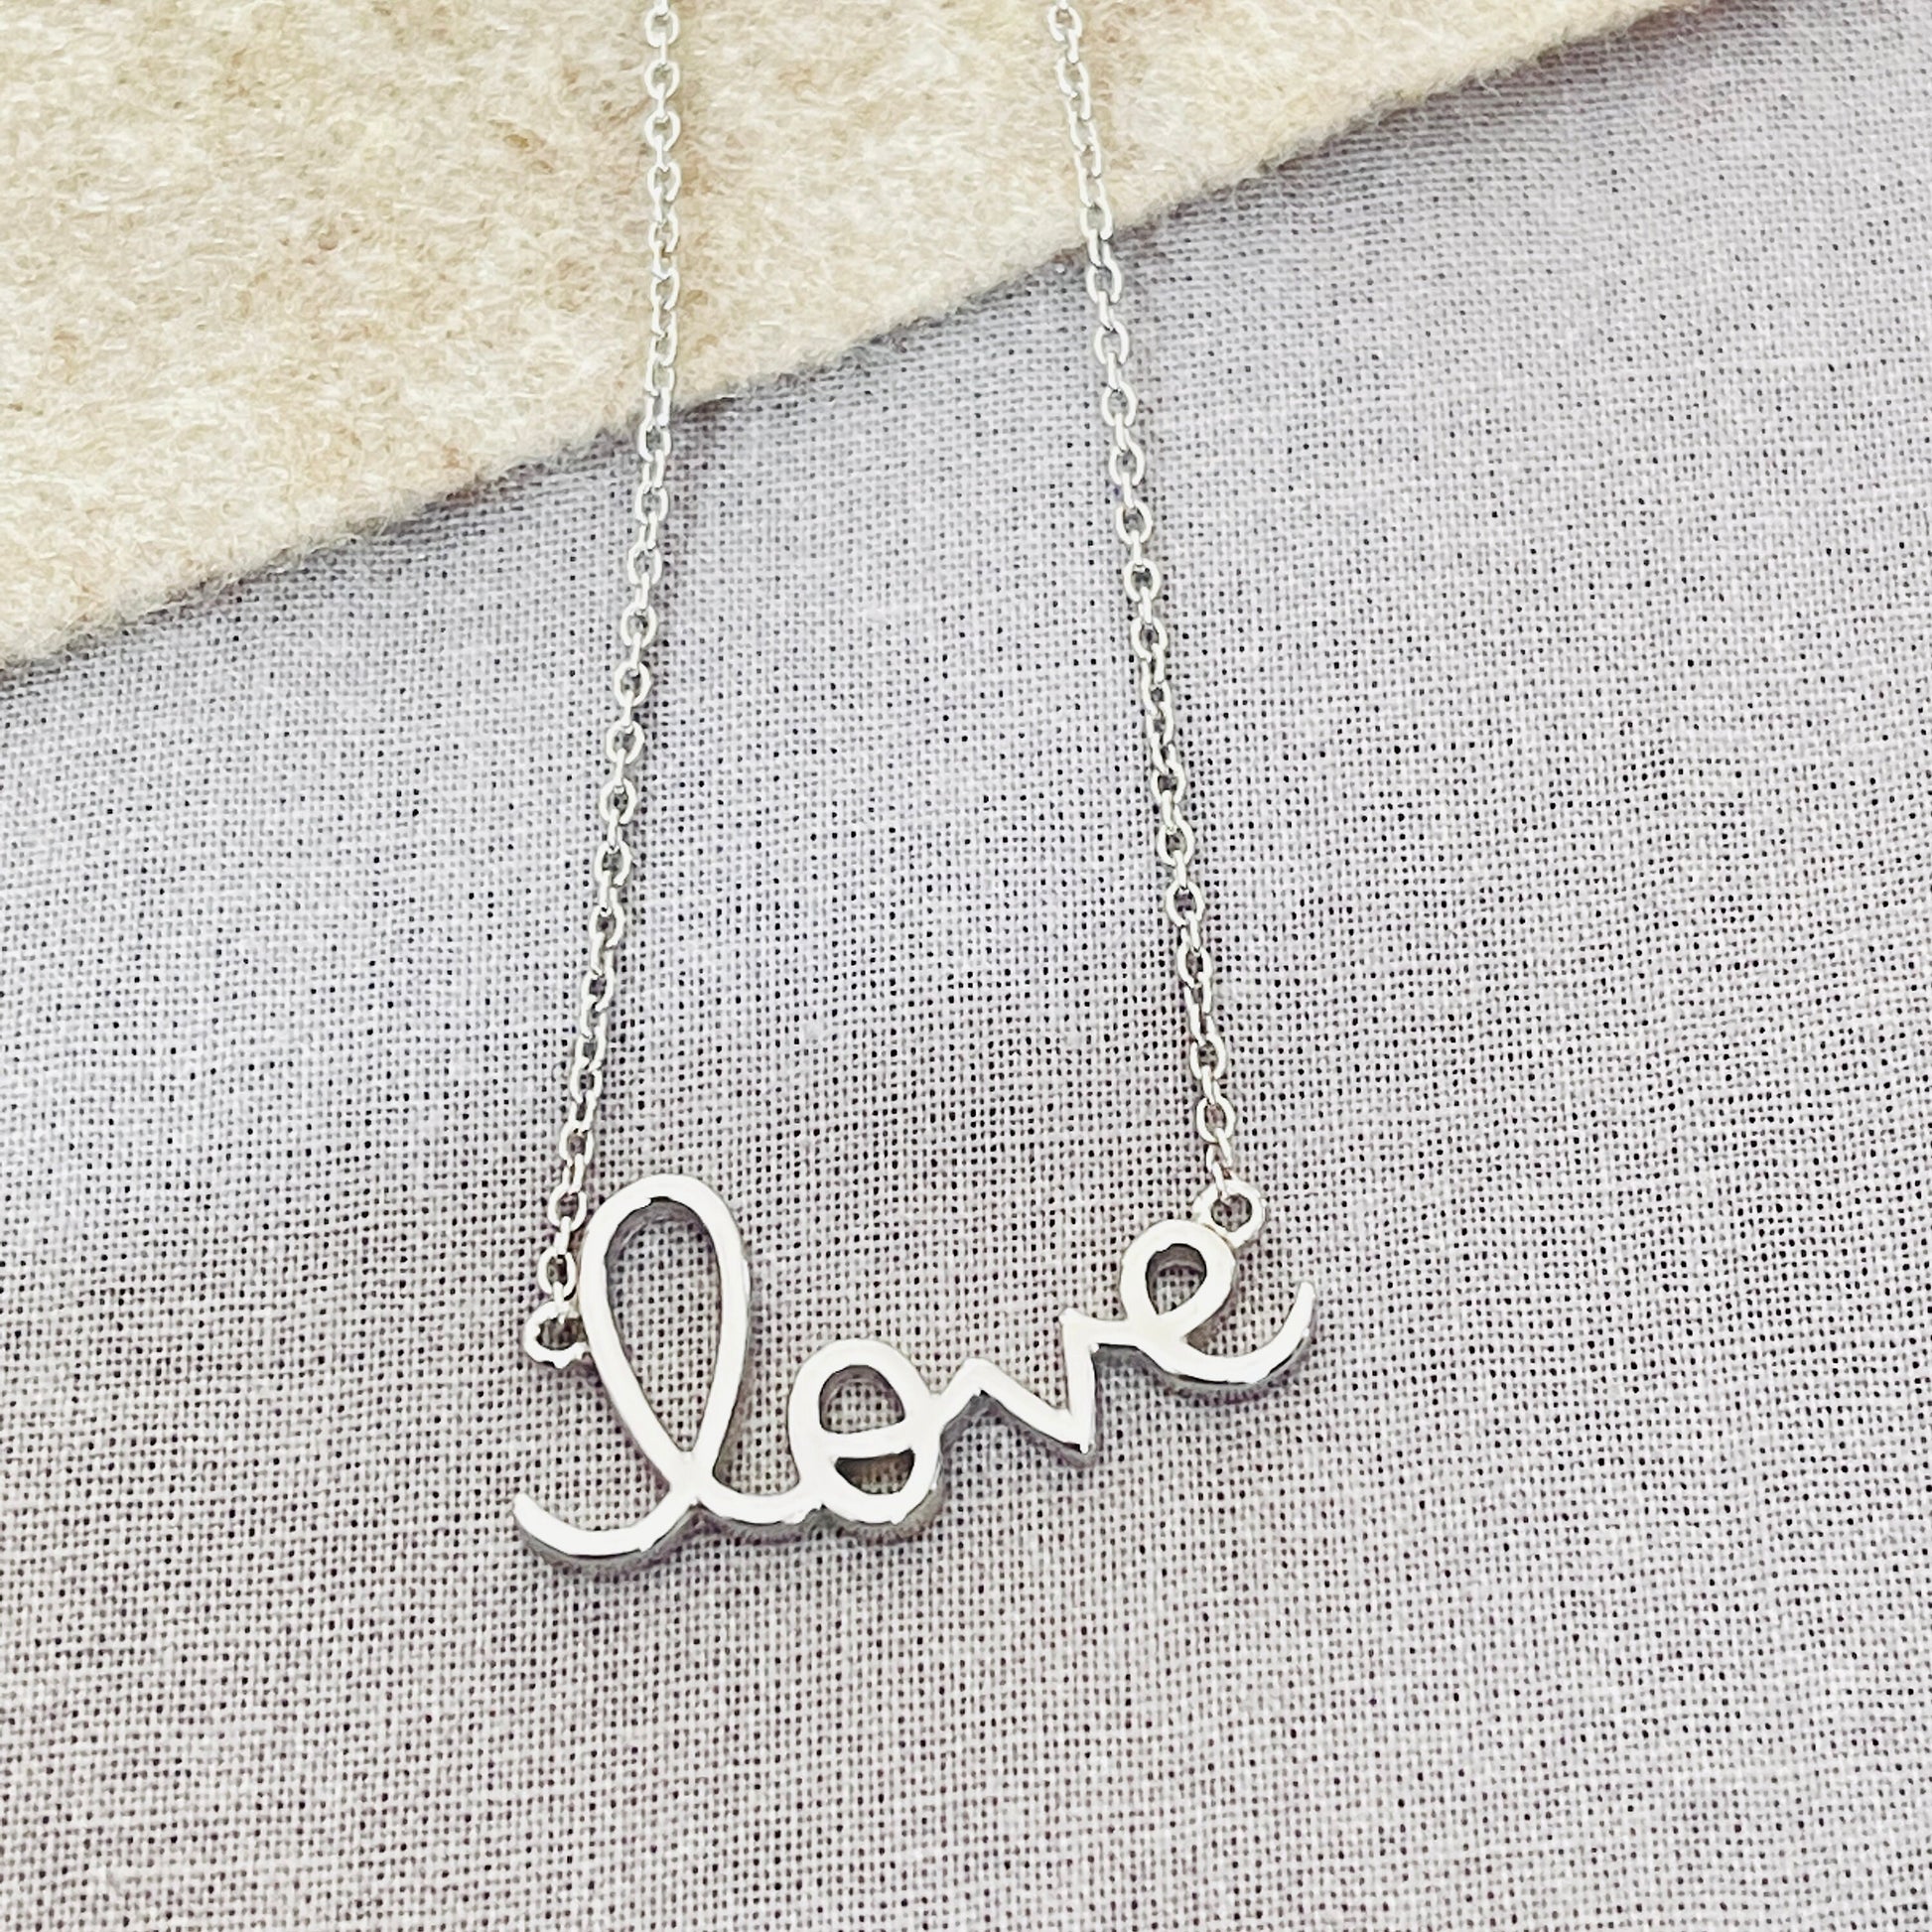 Dainty Love Necklace in Sterling Silver, Silver Love Necklace, Romantic Necklace, A Necklace For Everyday Use, Gifts For Her, Minimal - sjewellery|sara jewellery shop toronto